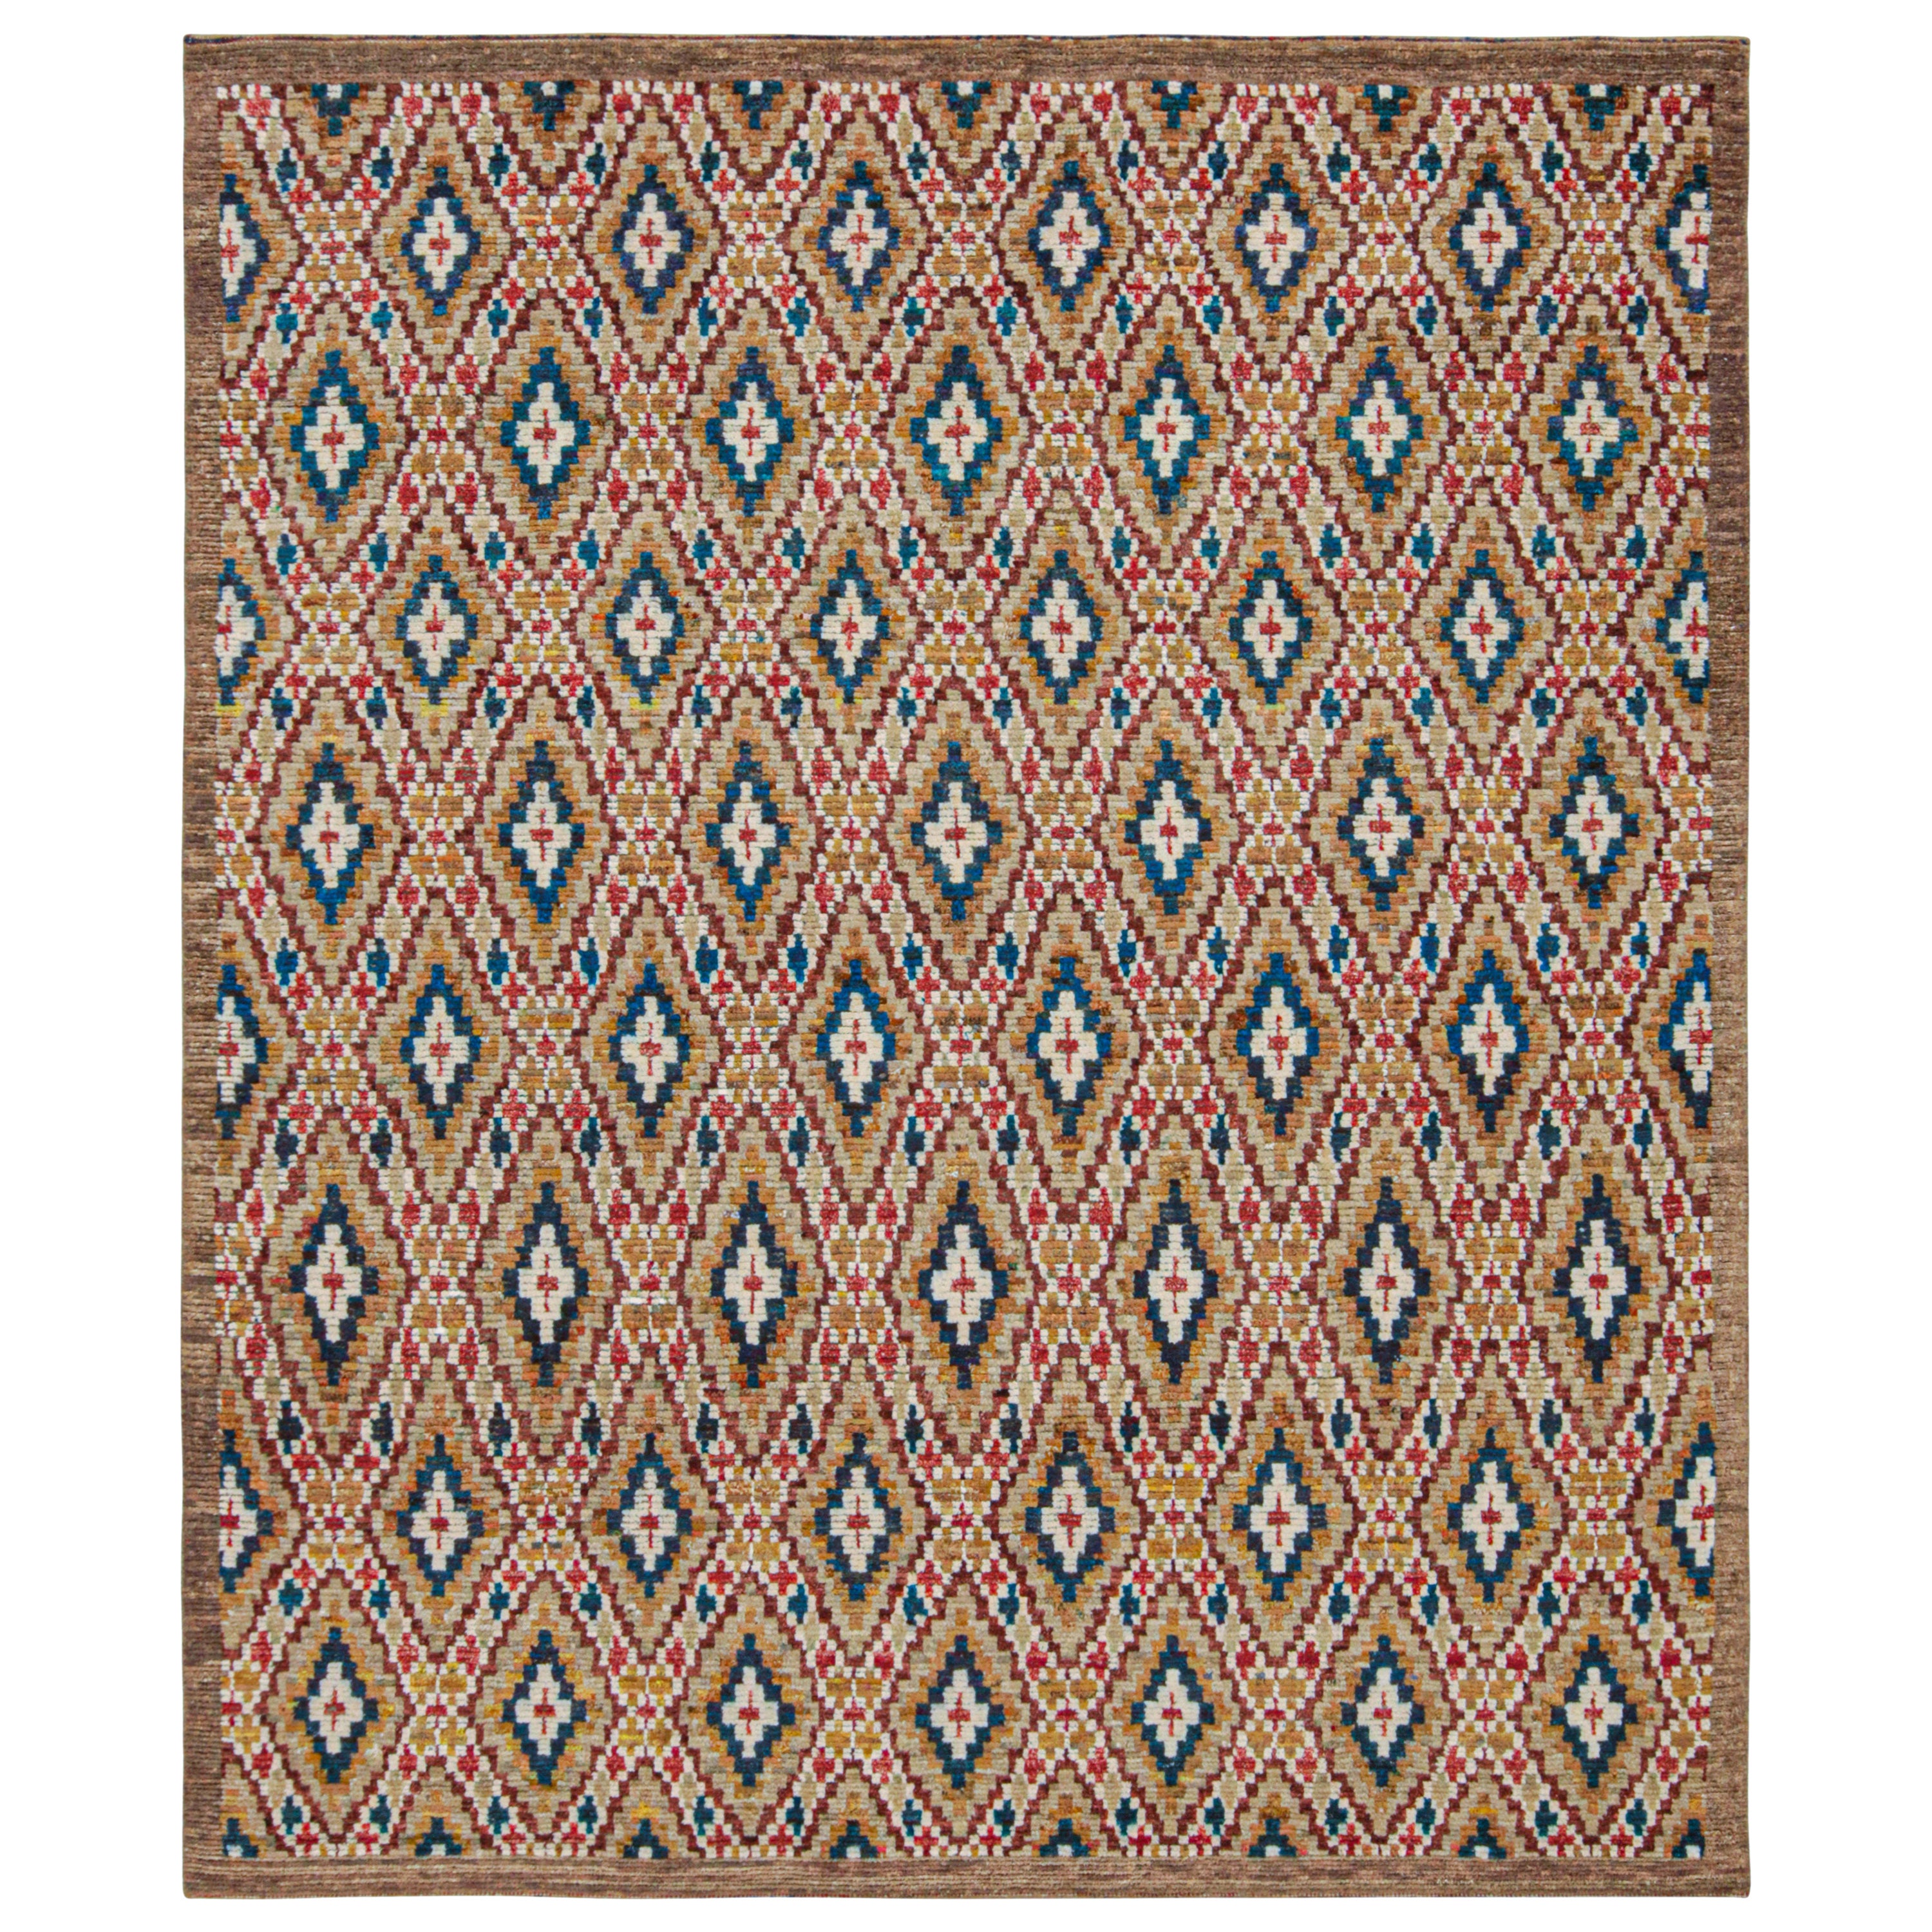 Rug & Kilim’s Moroccan Style Rug in Beige with Colorful Diamond Patterns